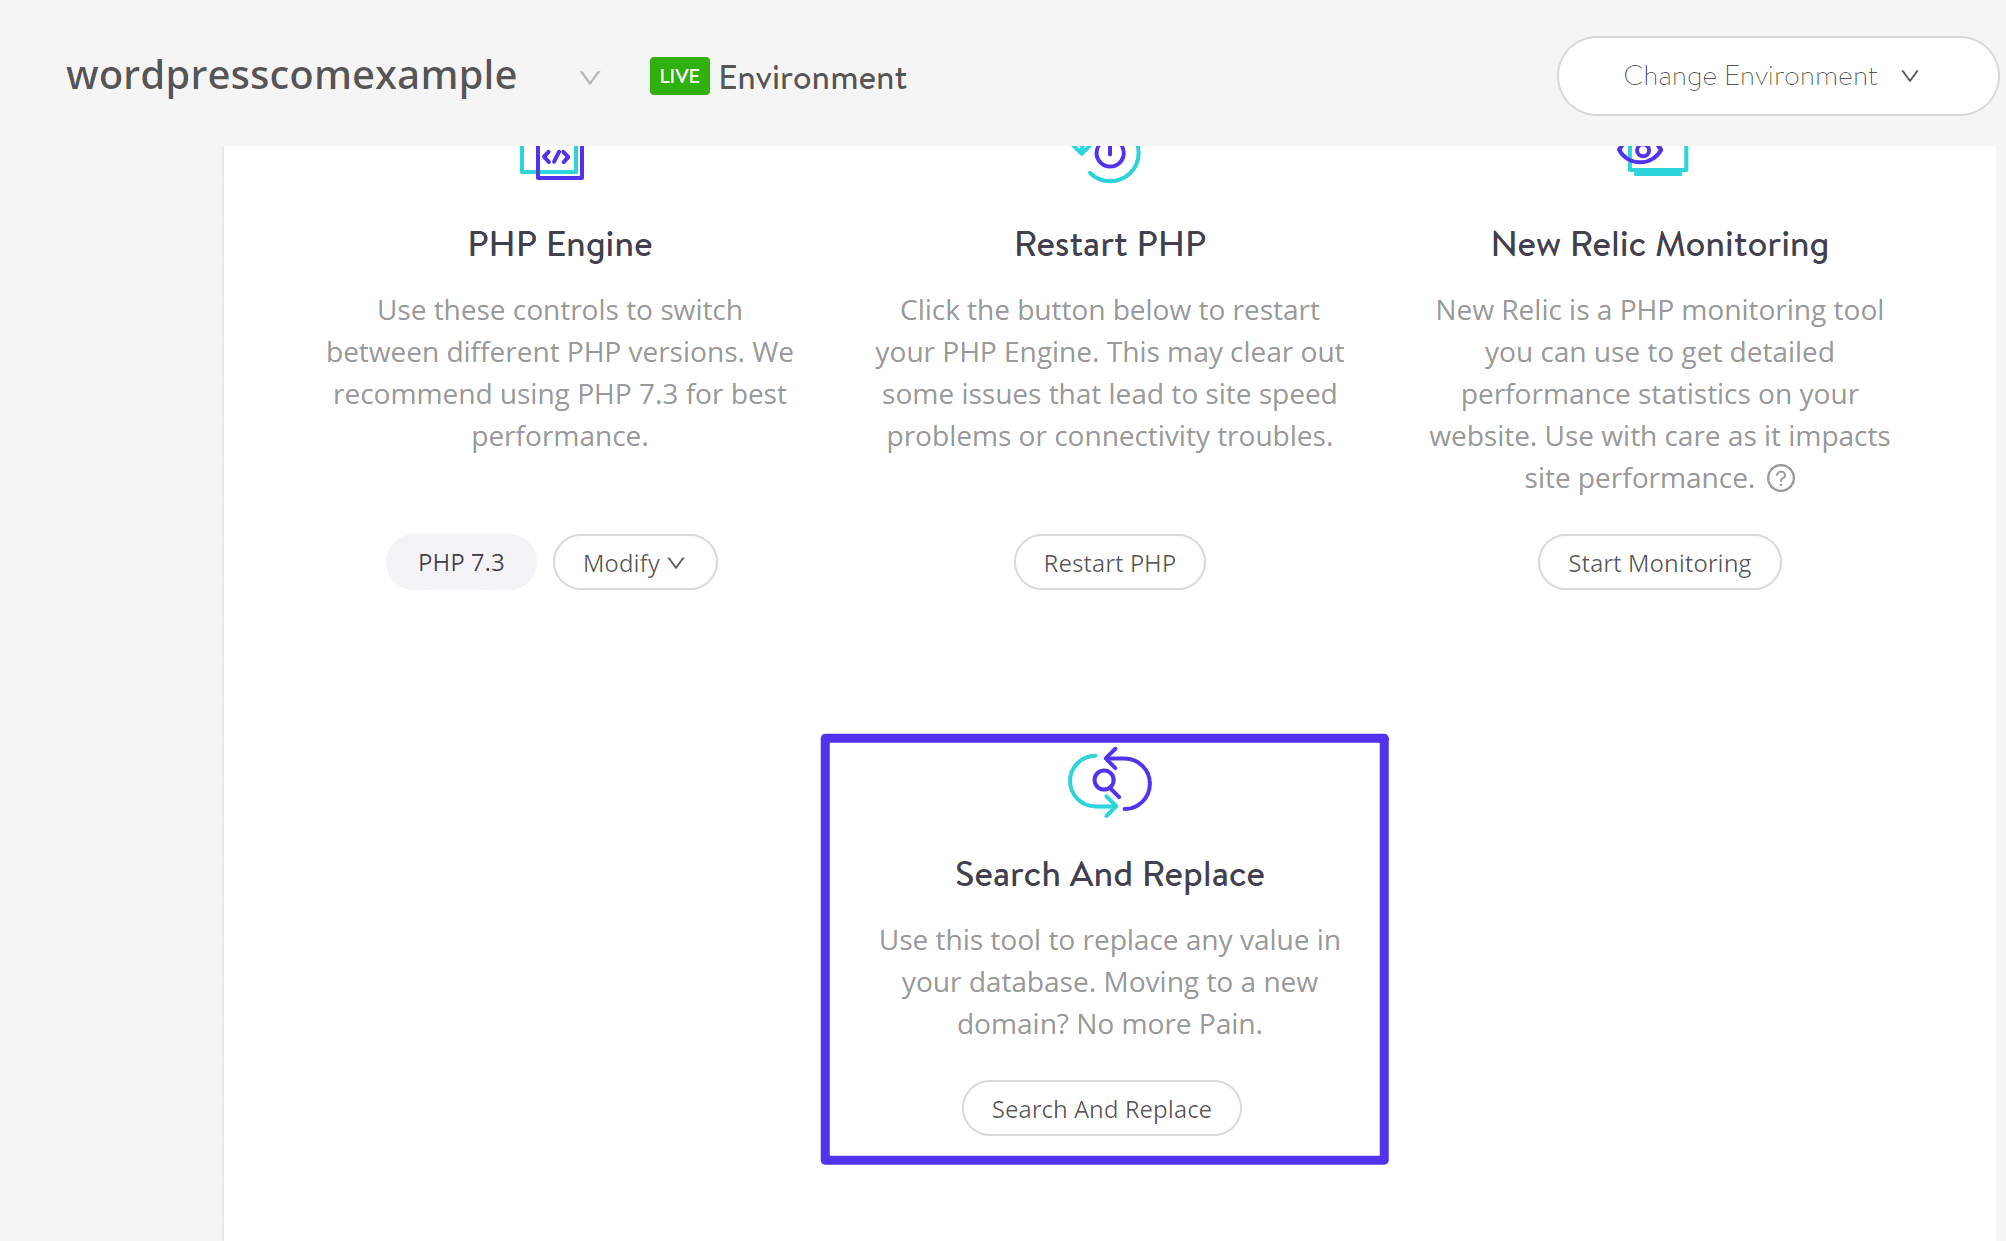 Kinsta Search And Replace tool